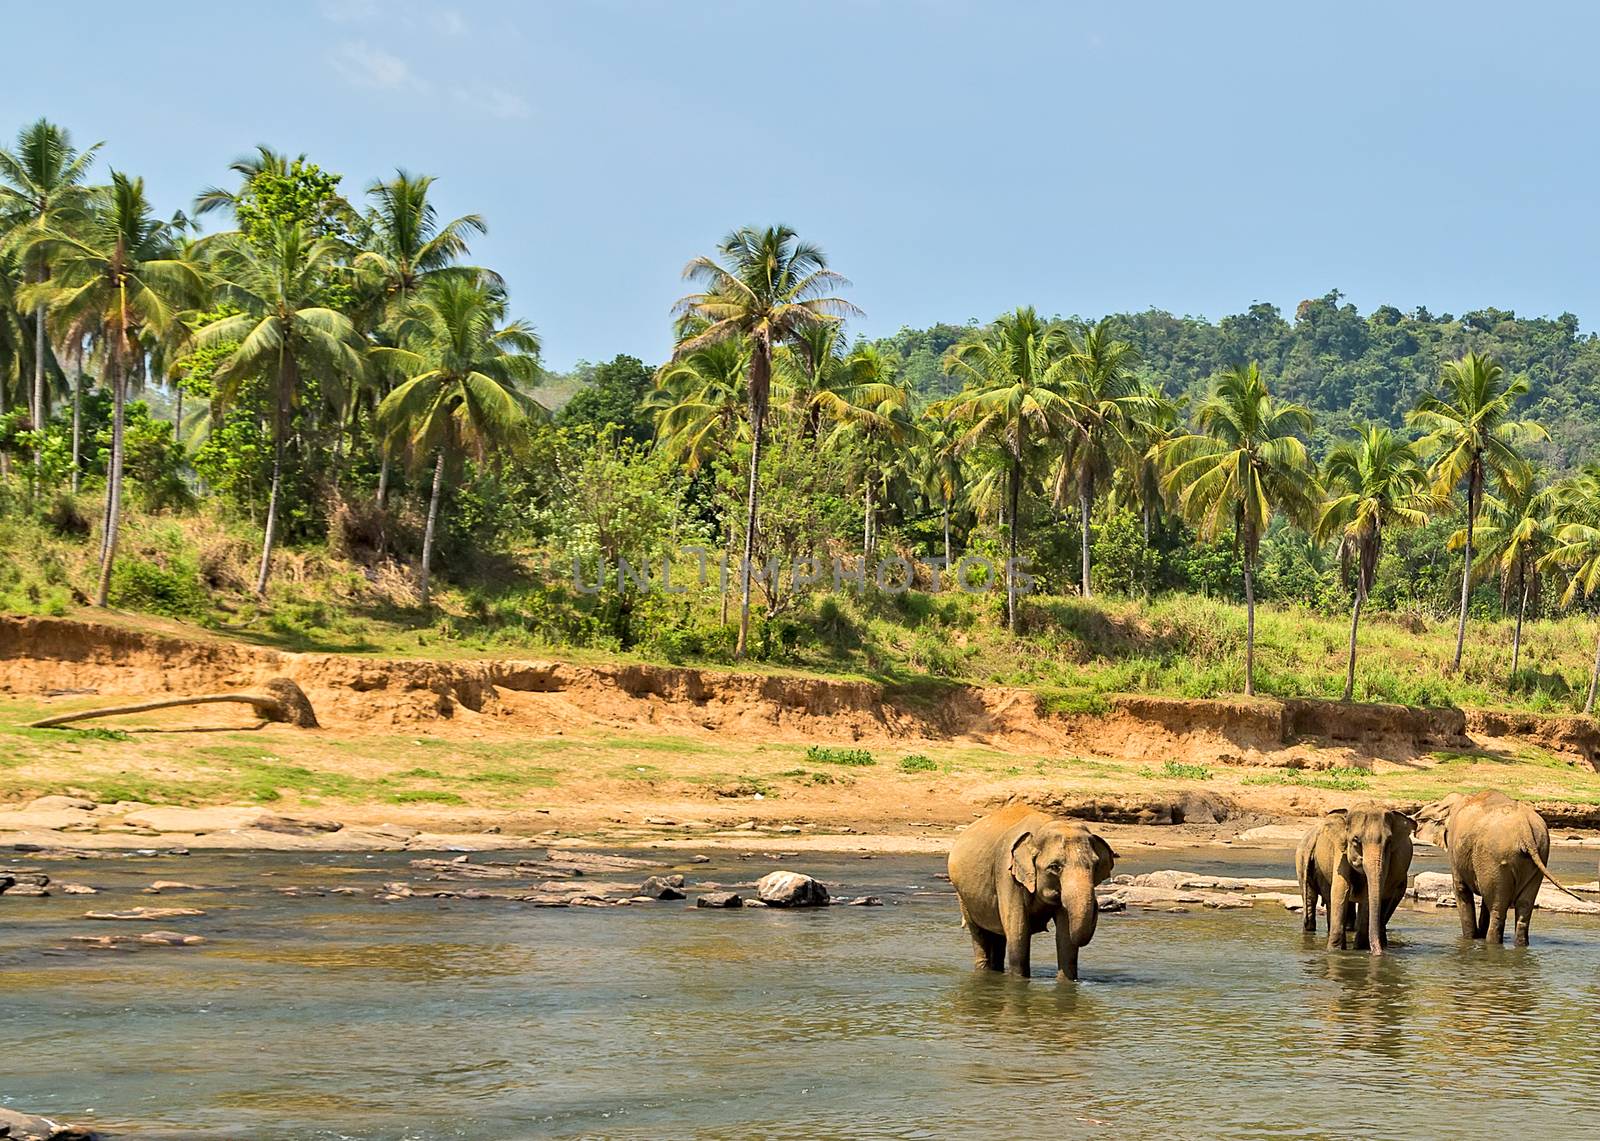 elephant in jungle river washing outdoor leisure.